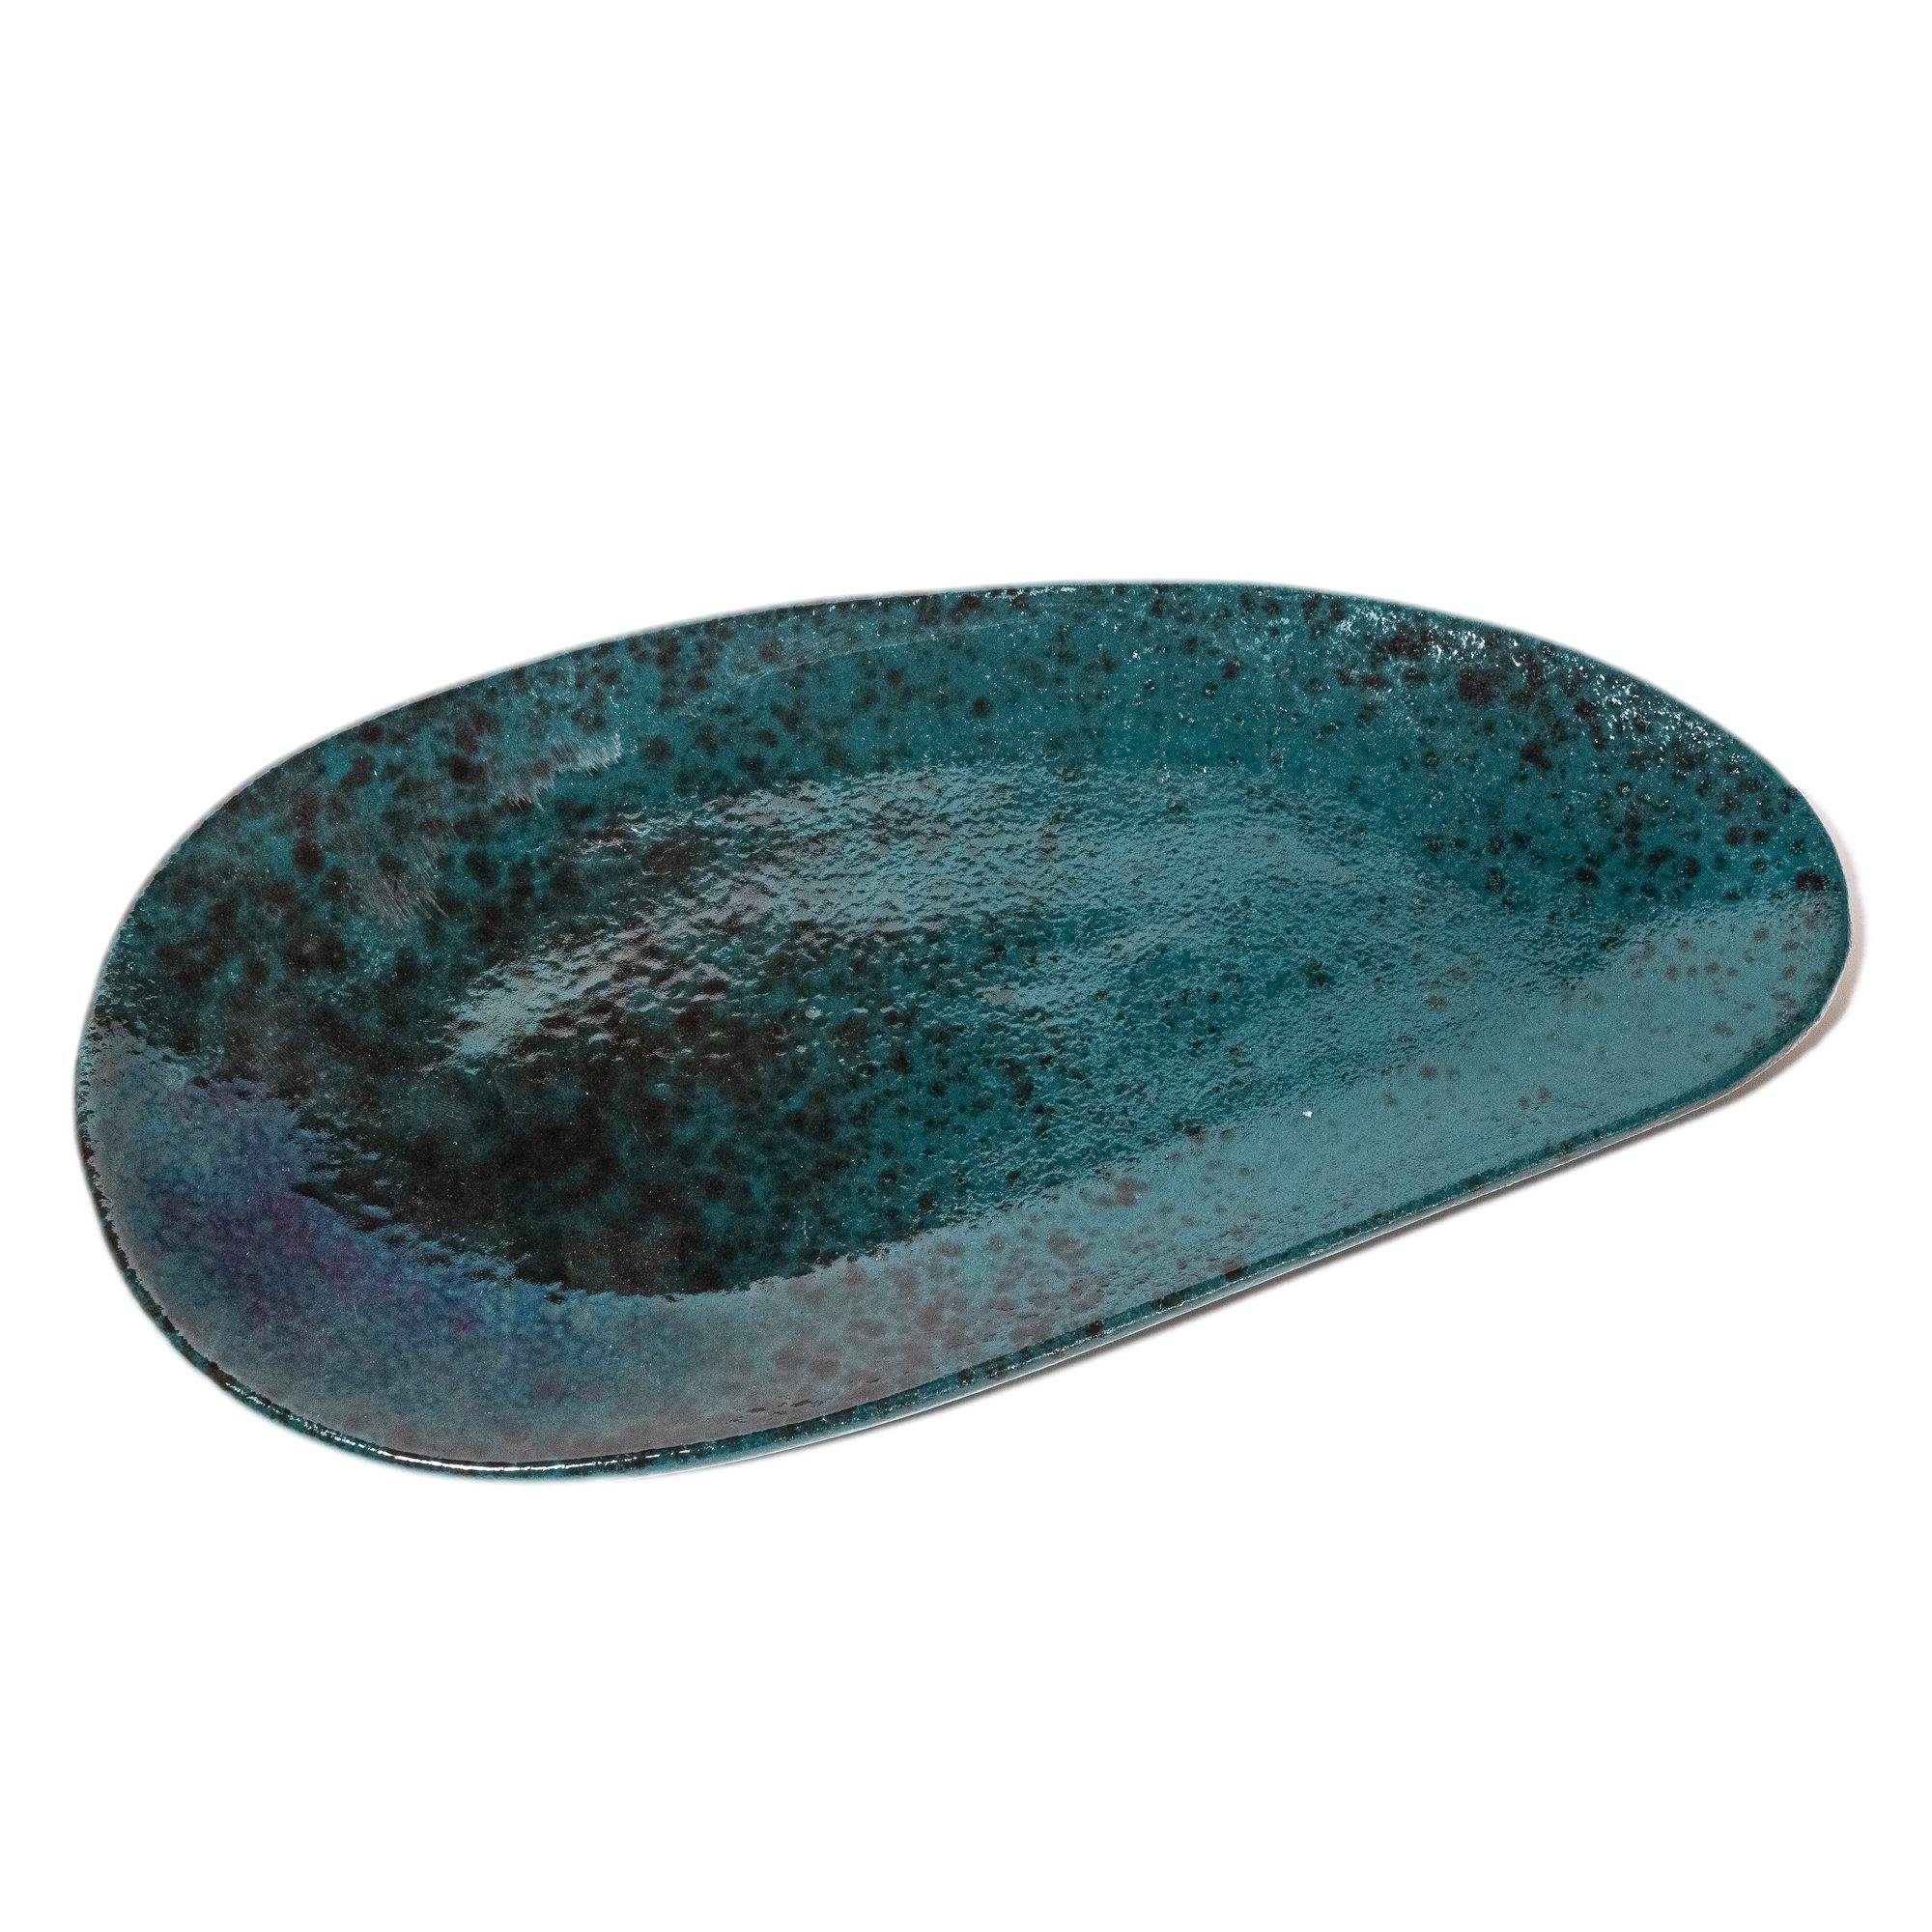 Copper And Teal Serving Tray - Chef May Shop